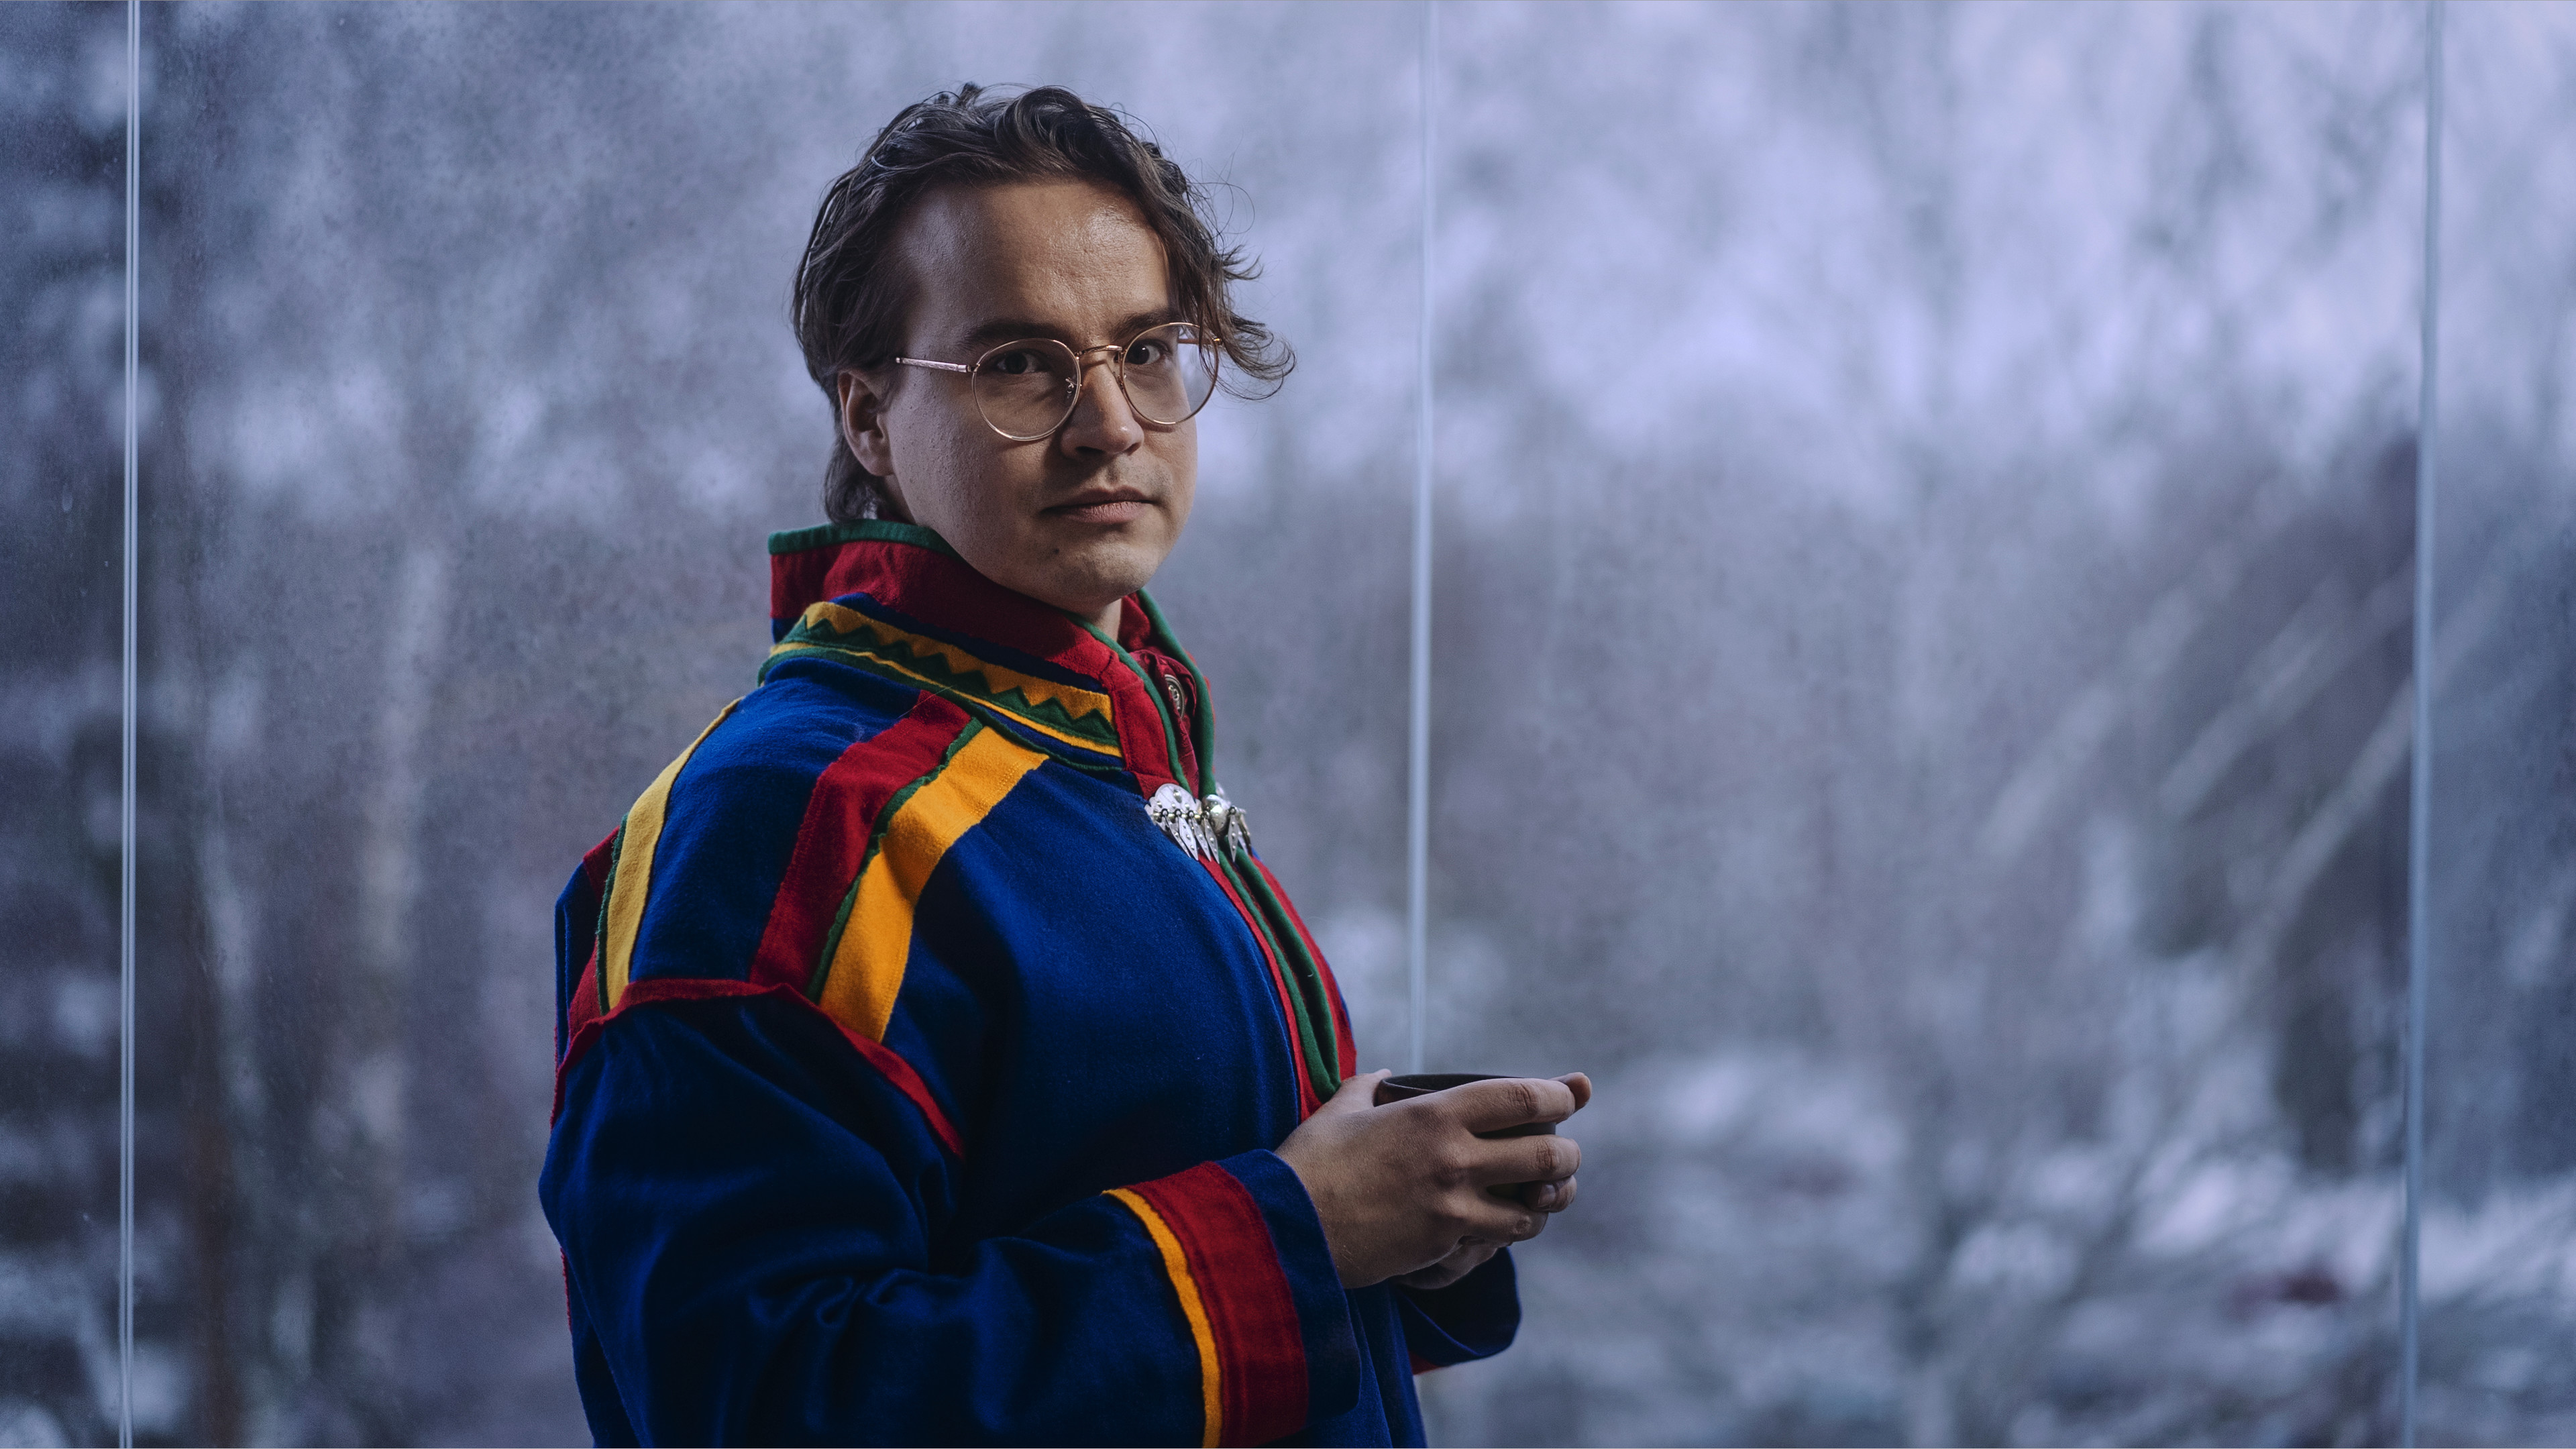 Sámi activist Janne Hirvasvuopio’s life threatened in a ‘Valentine’s Day card’: "There is a tangible threat of violence"